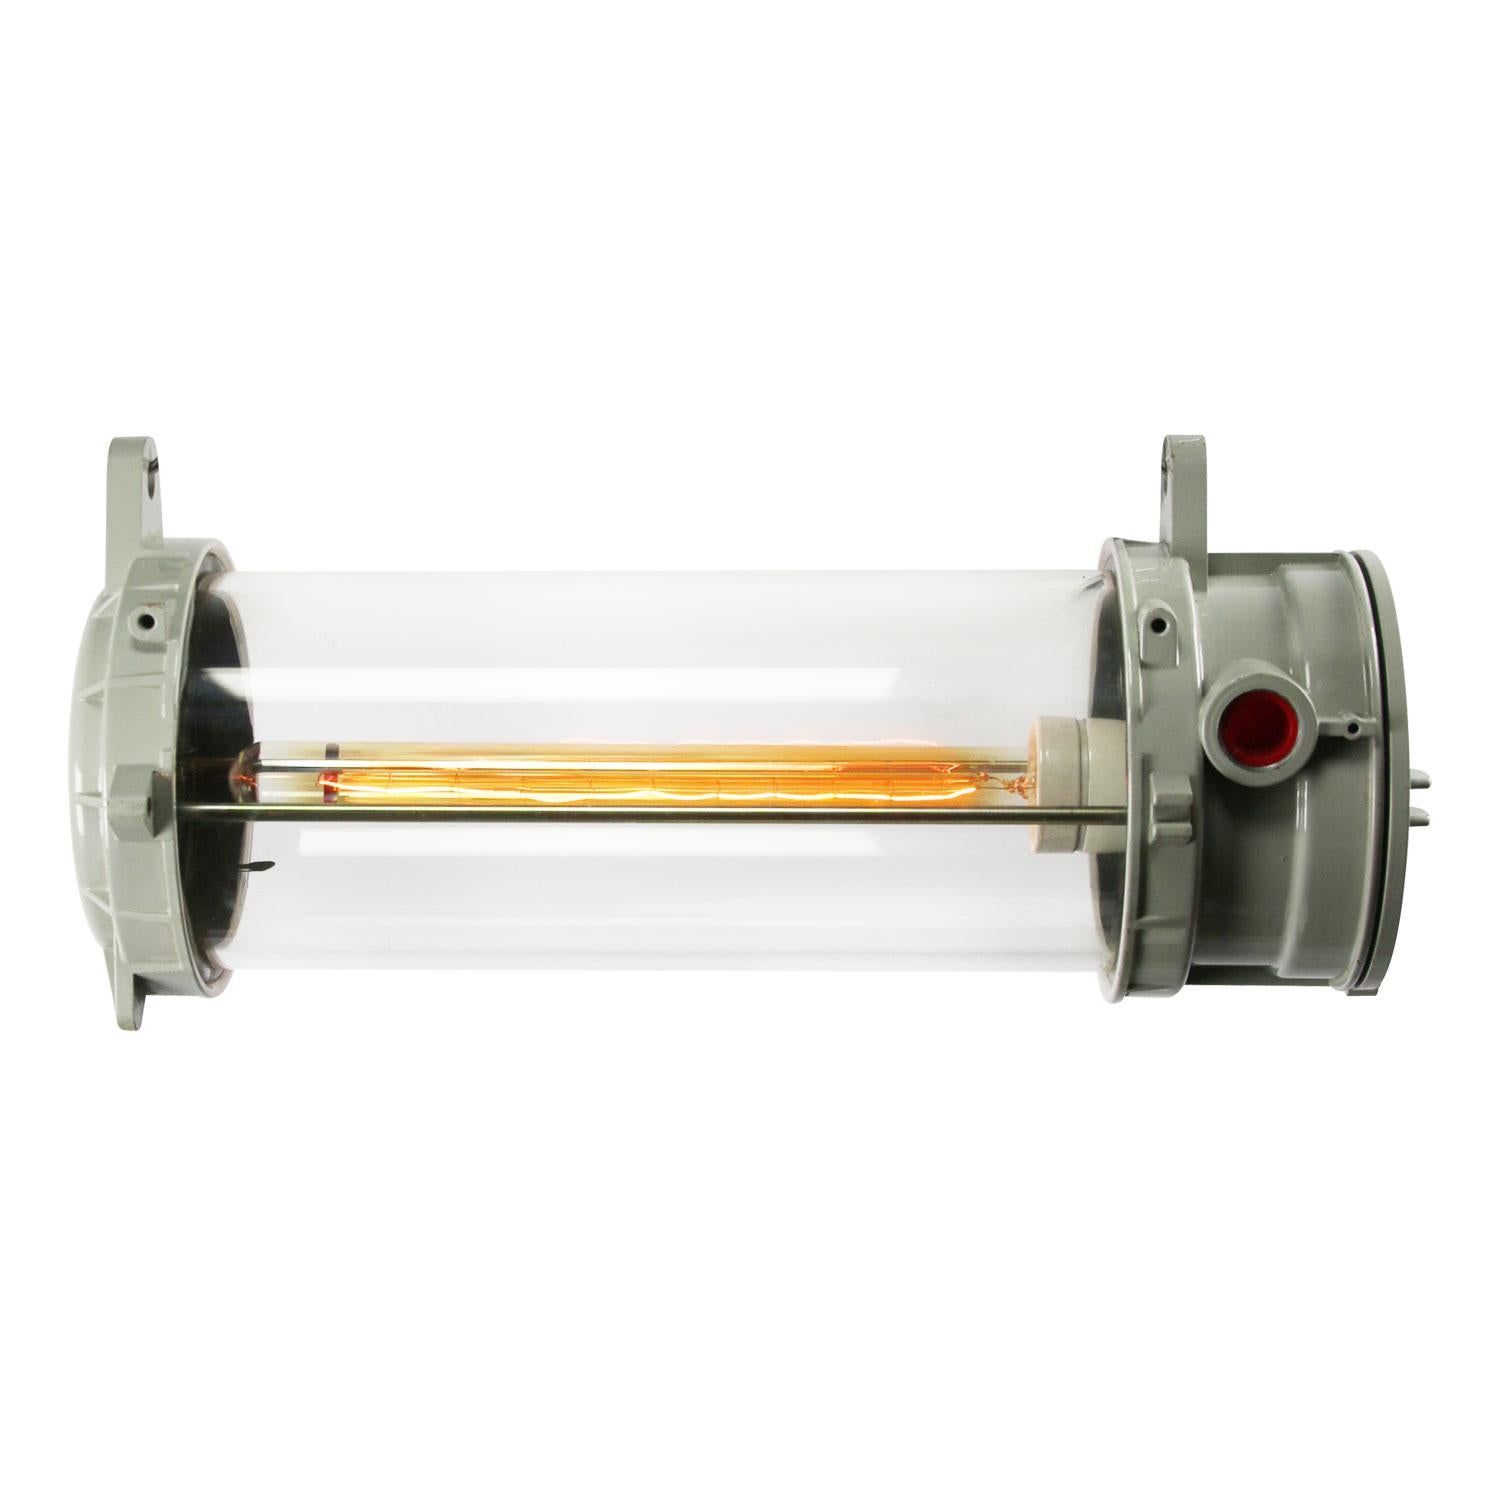 Tube Industrial cast aluminum light. 
Clear glass. Converted for E26 / E27 light bulbs.

Weight: 5.0 kg / 11 lb

Priced per individual item. All lamps have been made suitable by international standards for incandescent light bulbs,